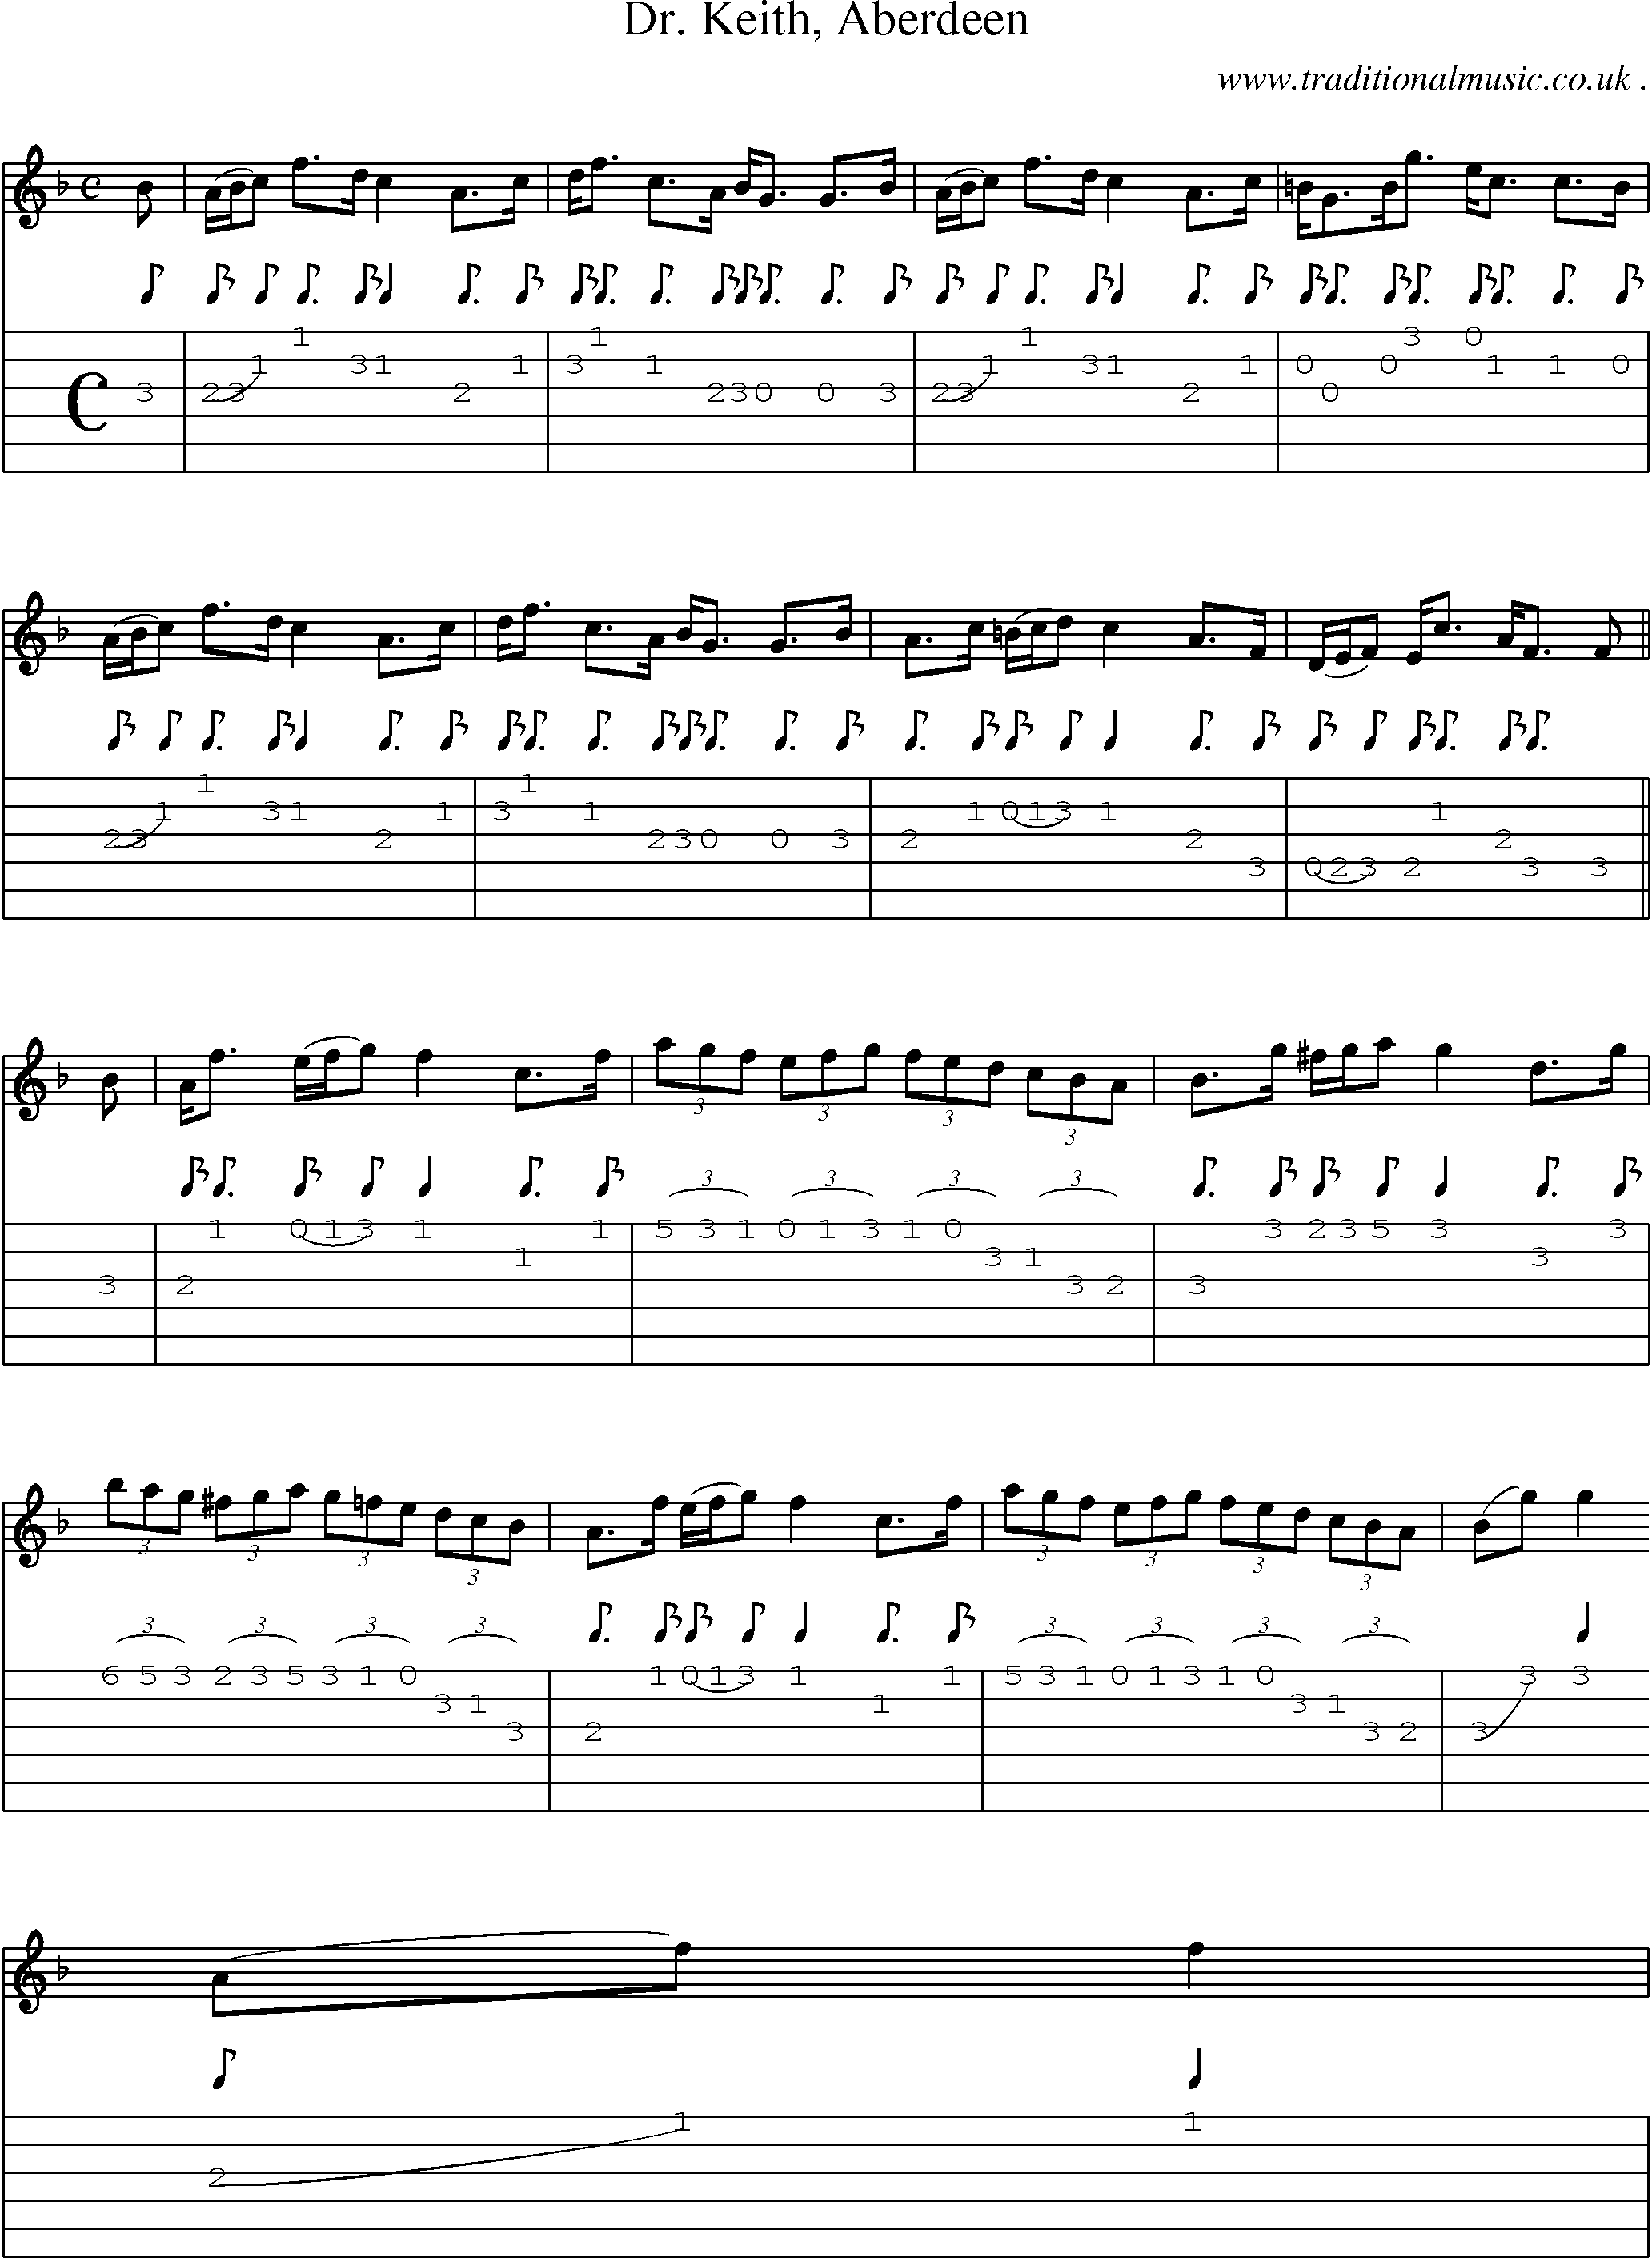 Sheet-music  score, Chords and Guitar Tabs for Dr Keith Aberdeen